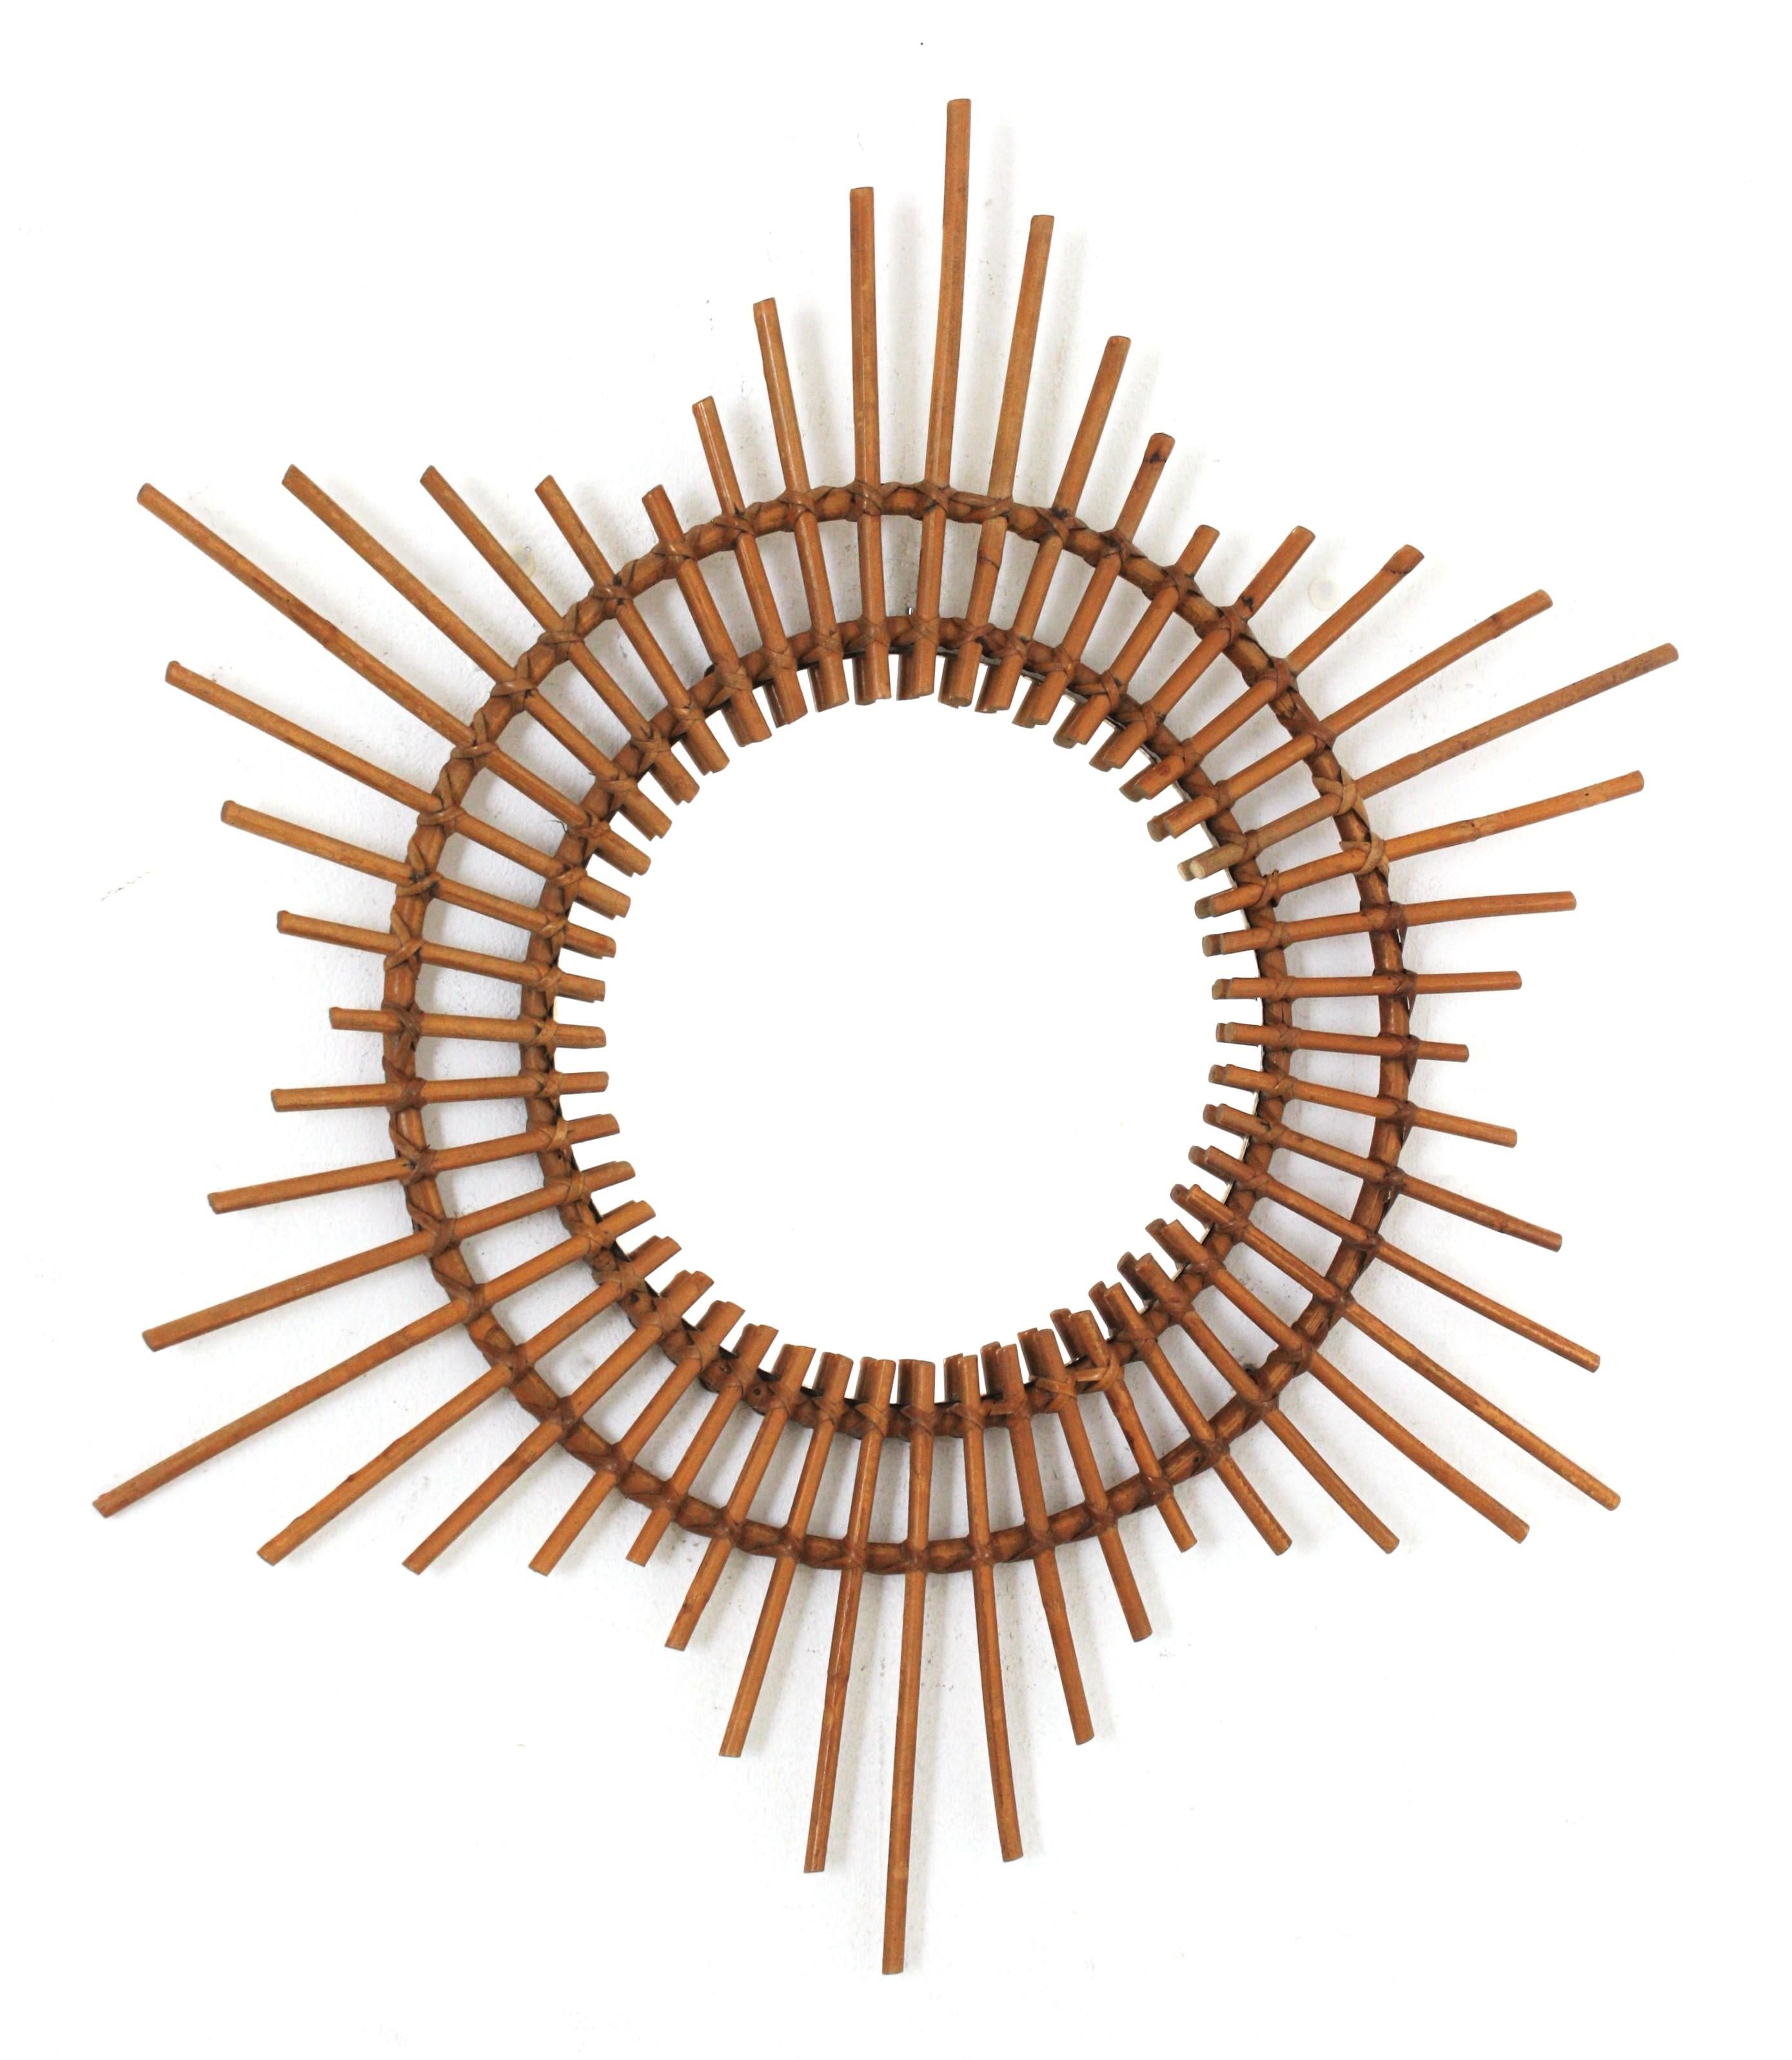 Rattan Sunburst / Starburst Mirror
A beautiful handcrafted rattan starburst mirror. France, 1960s.
This mirror can add all the freshness of the Mediterranean French Riviera style to any countryside/beach house decoration. It can be also interesting